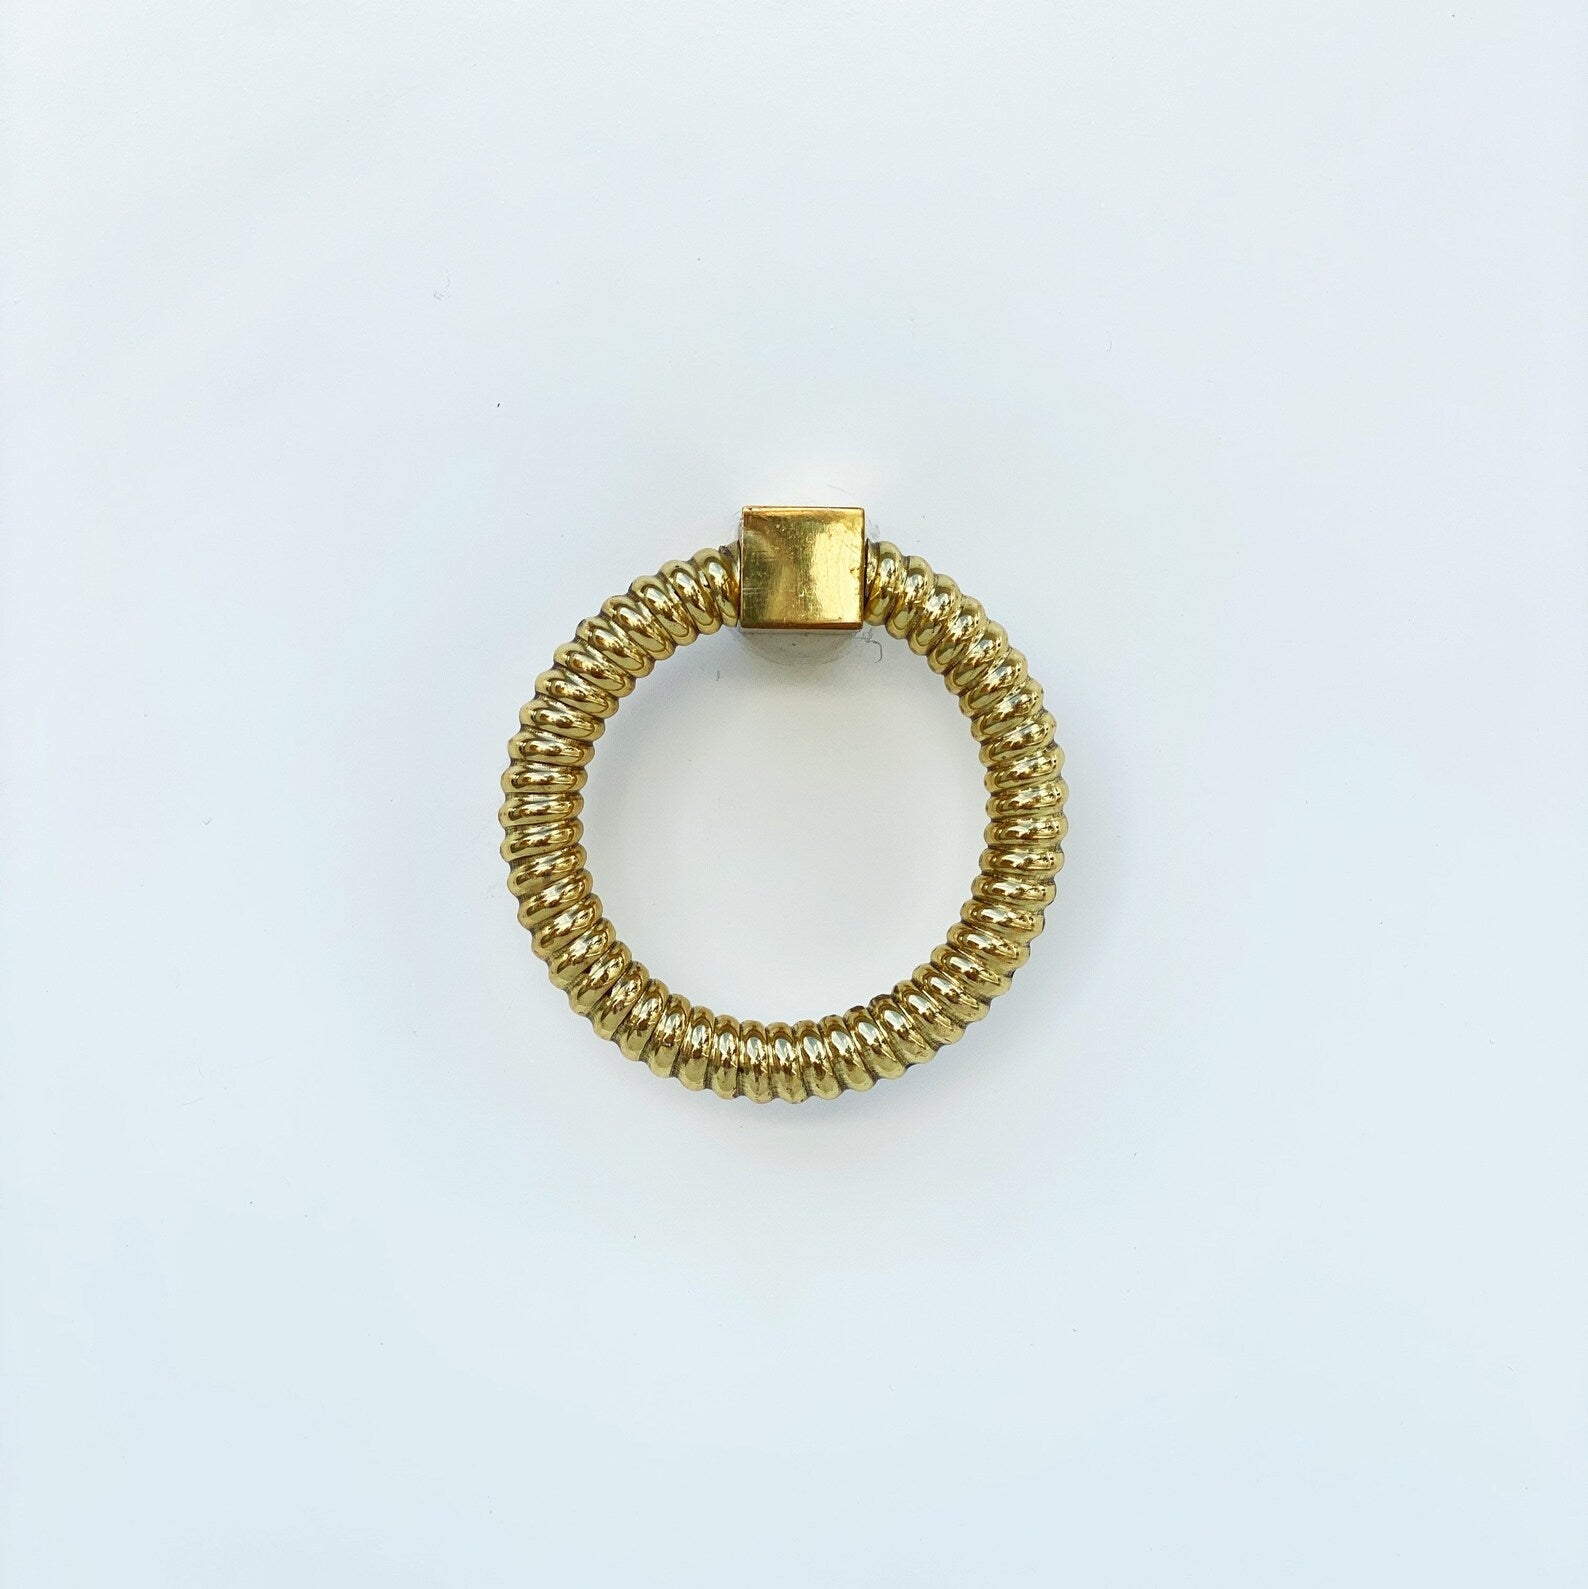 Polished Brass "Rope" Ring Pull Cabinet Knob - Industry Hardware